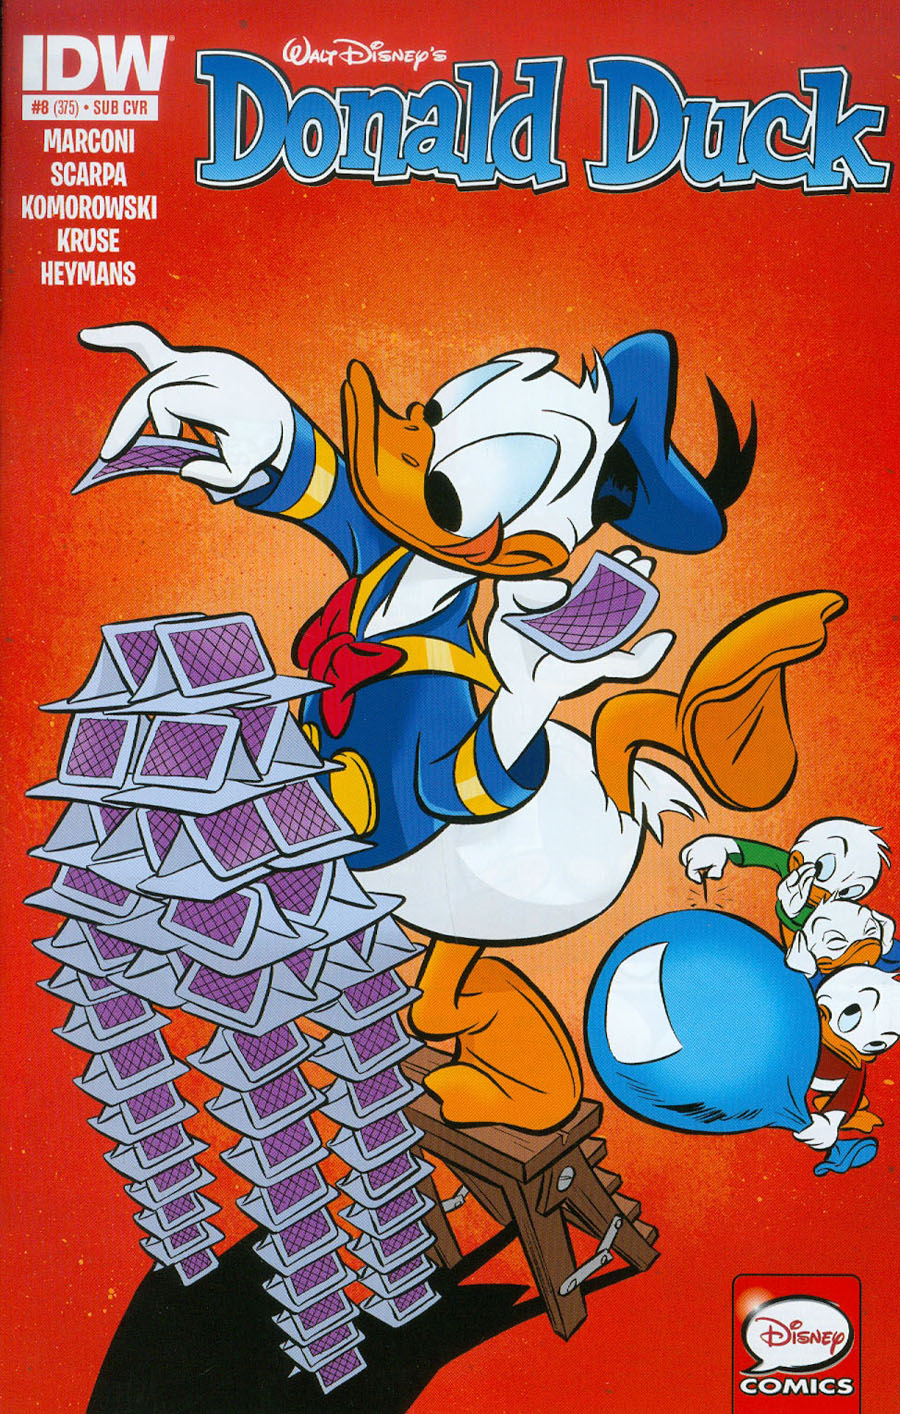 Donald Duck Vol 2 #8 Cover B Variant Daan Jippes Subscription Cover